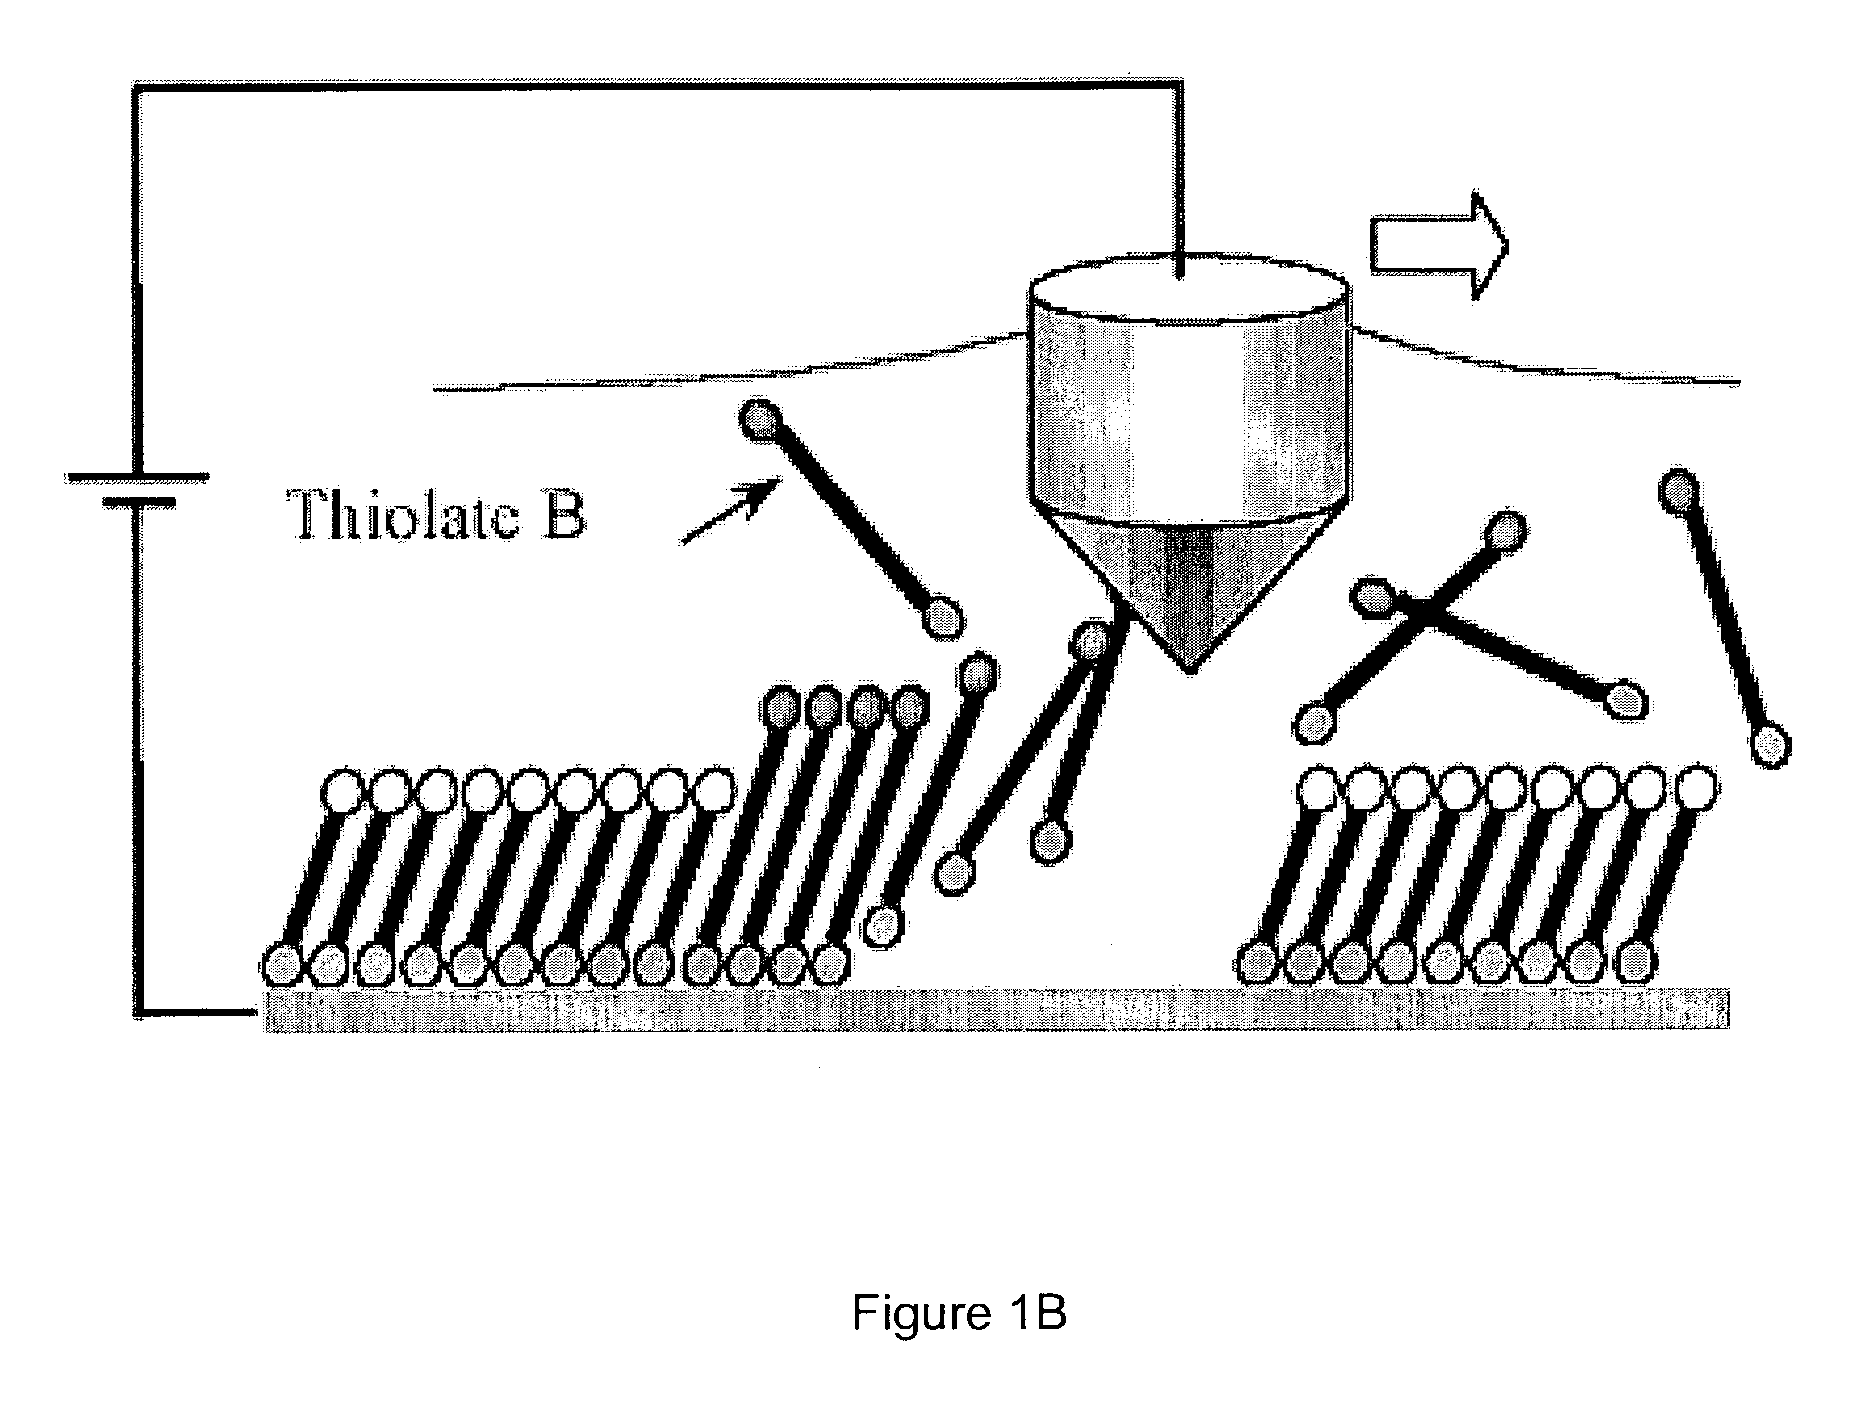 Gradient fabrication to direct transport on a surface